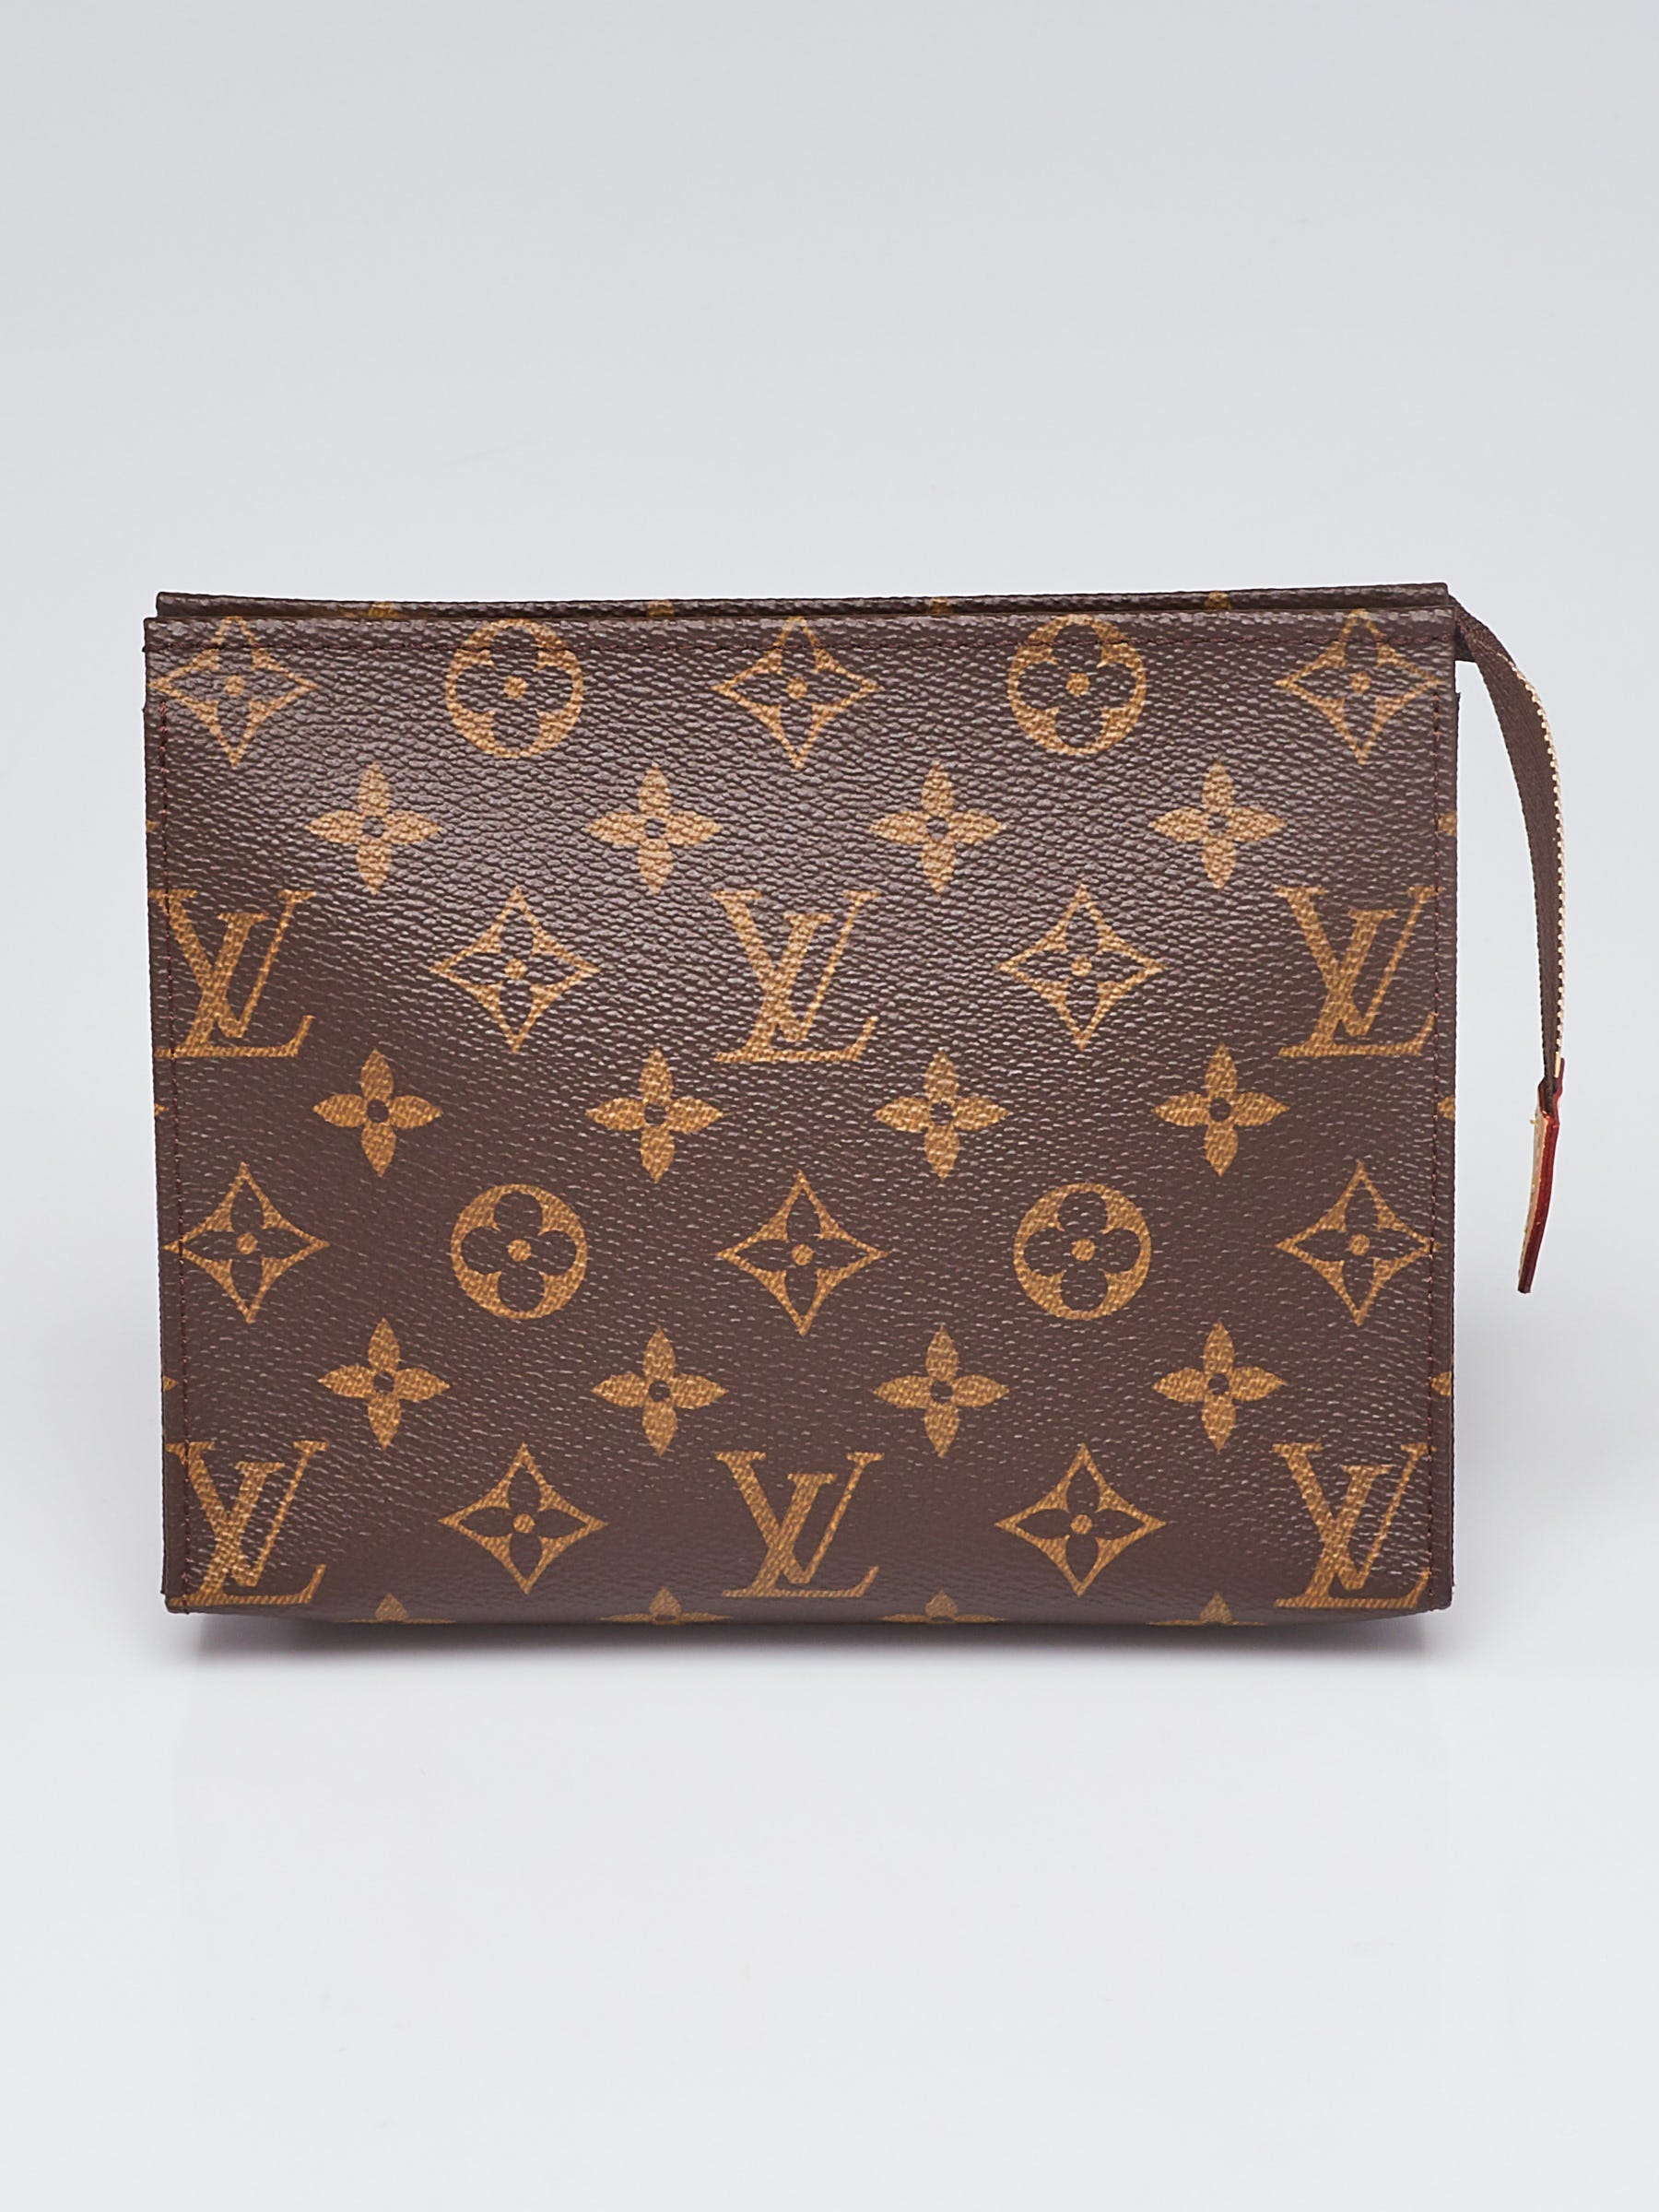 Louis Vuitton Toiletry Pouch 19 Review 